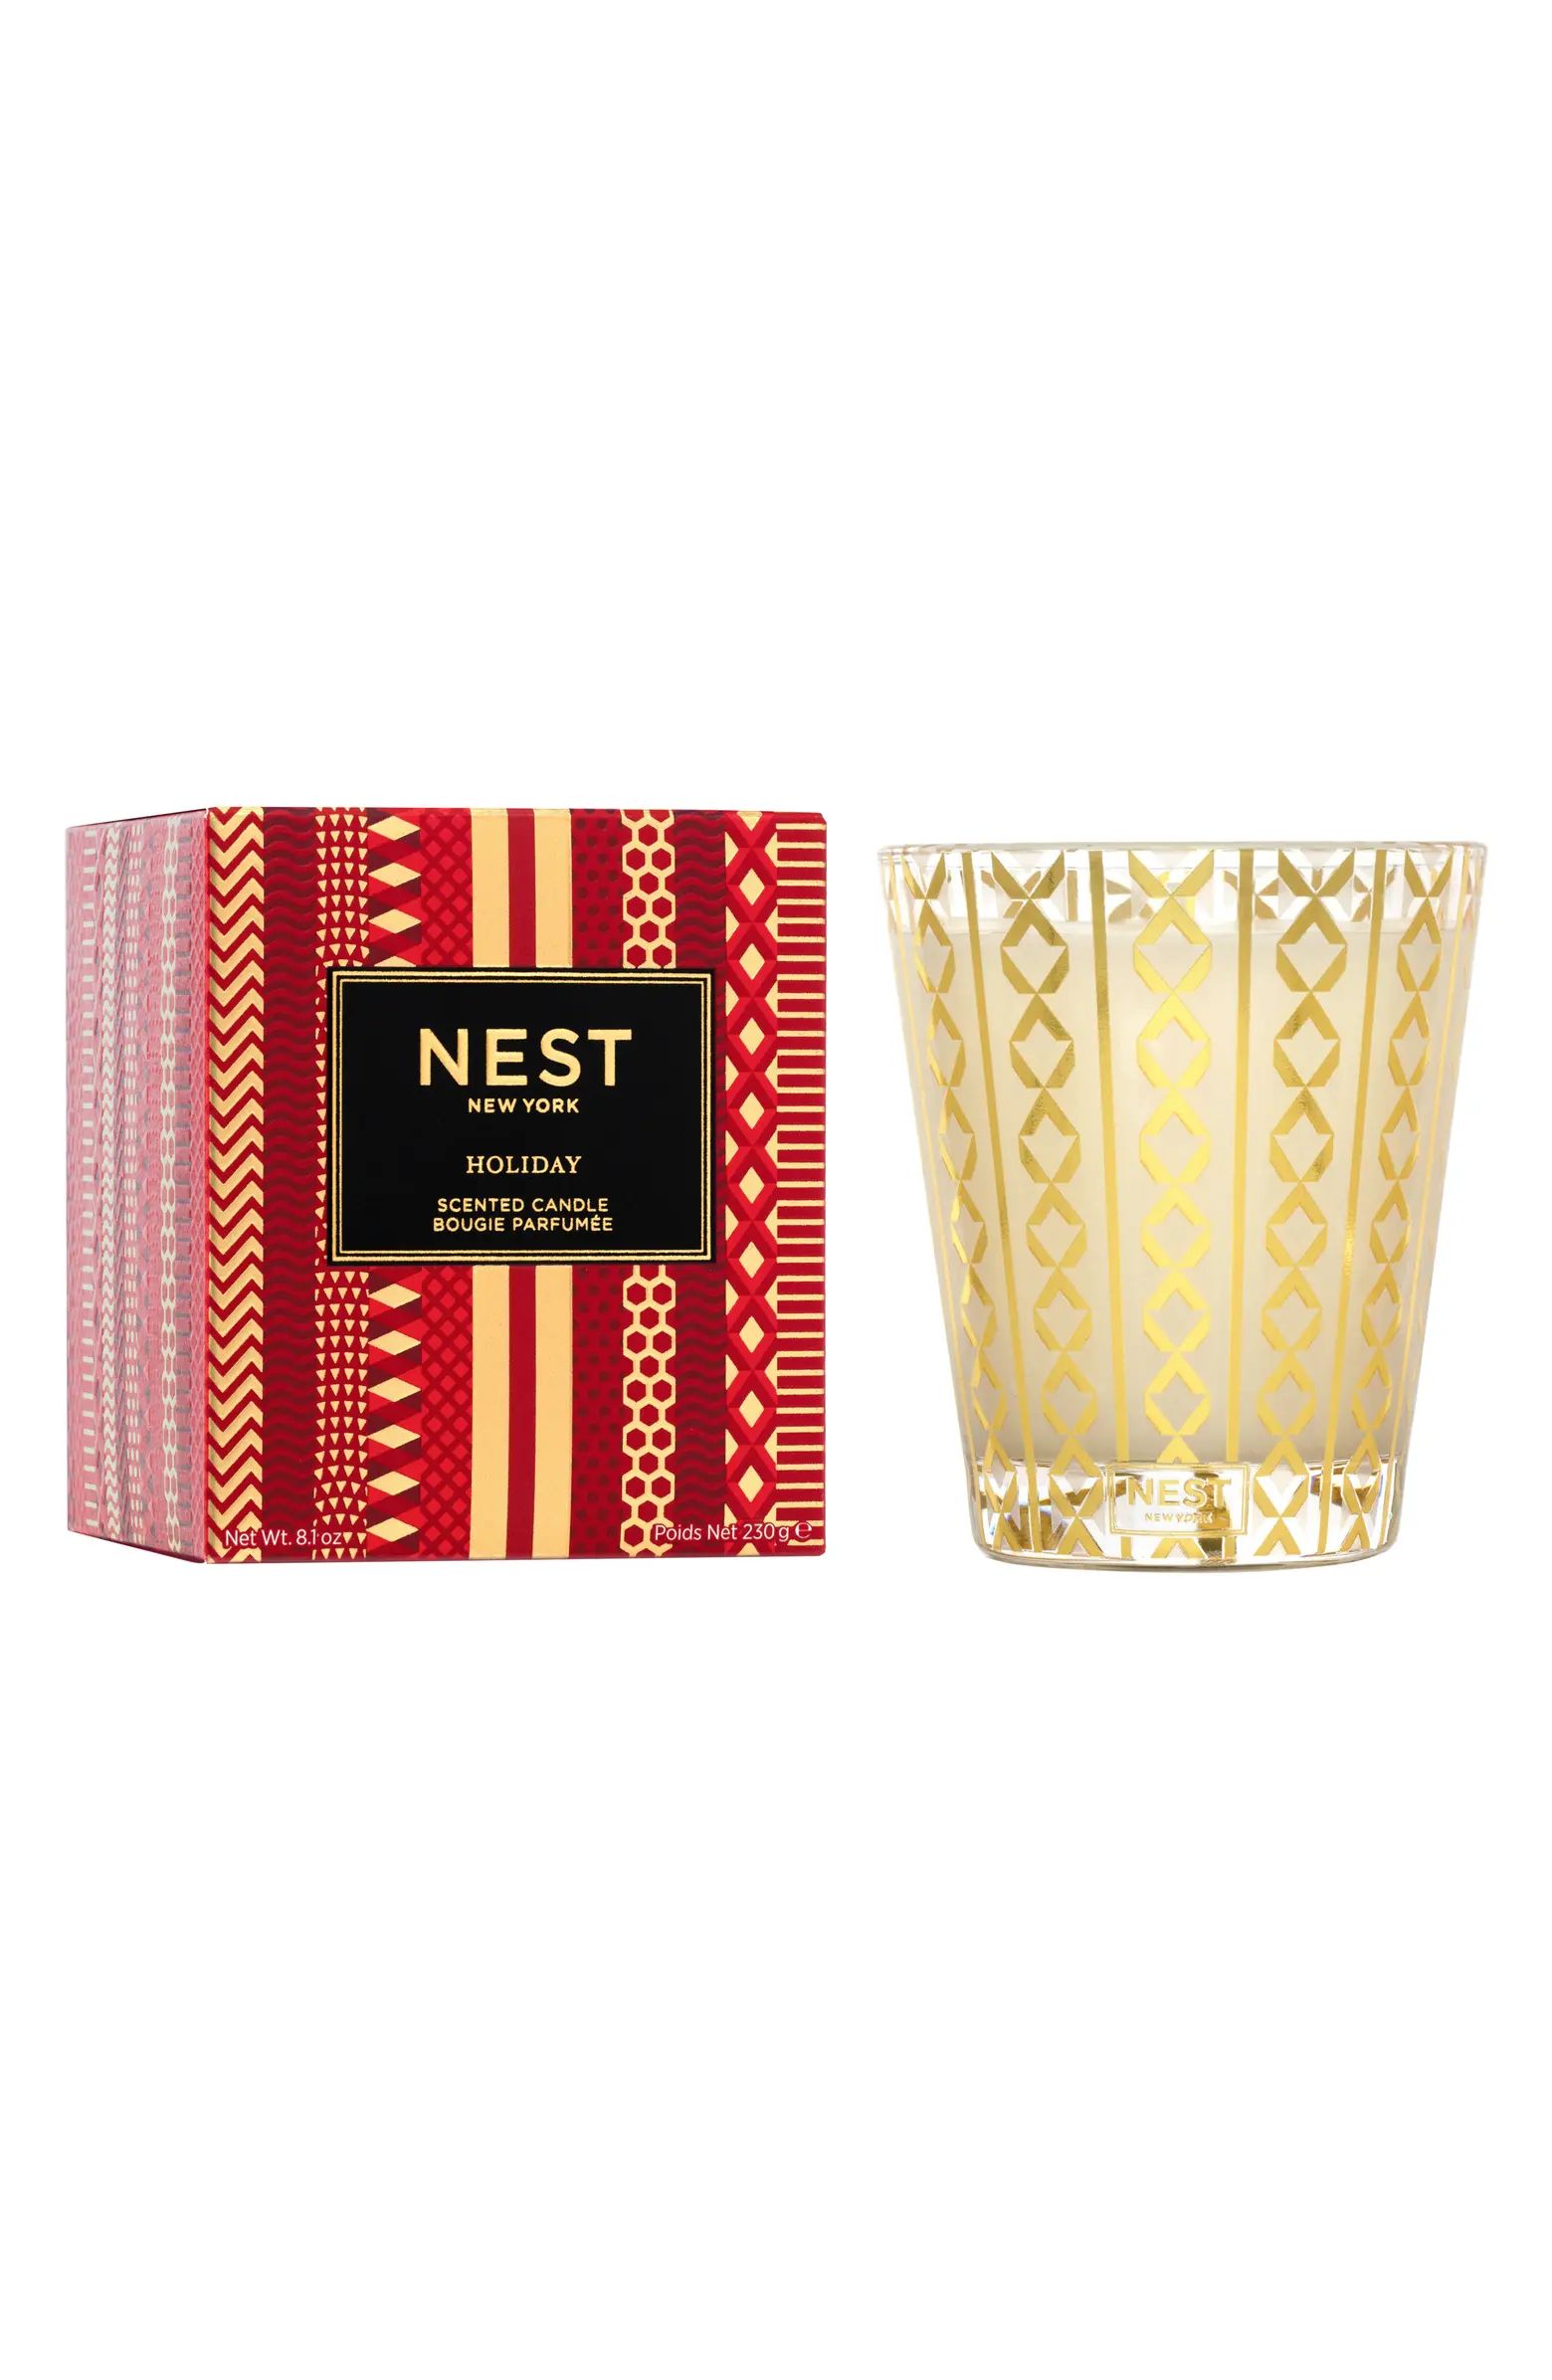 Holiday Candle | Nordstrom